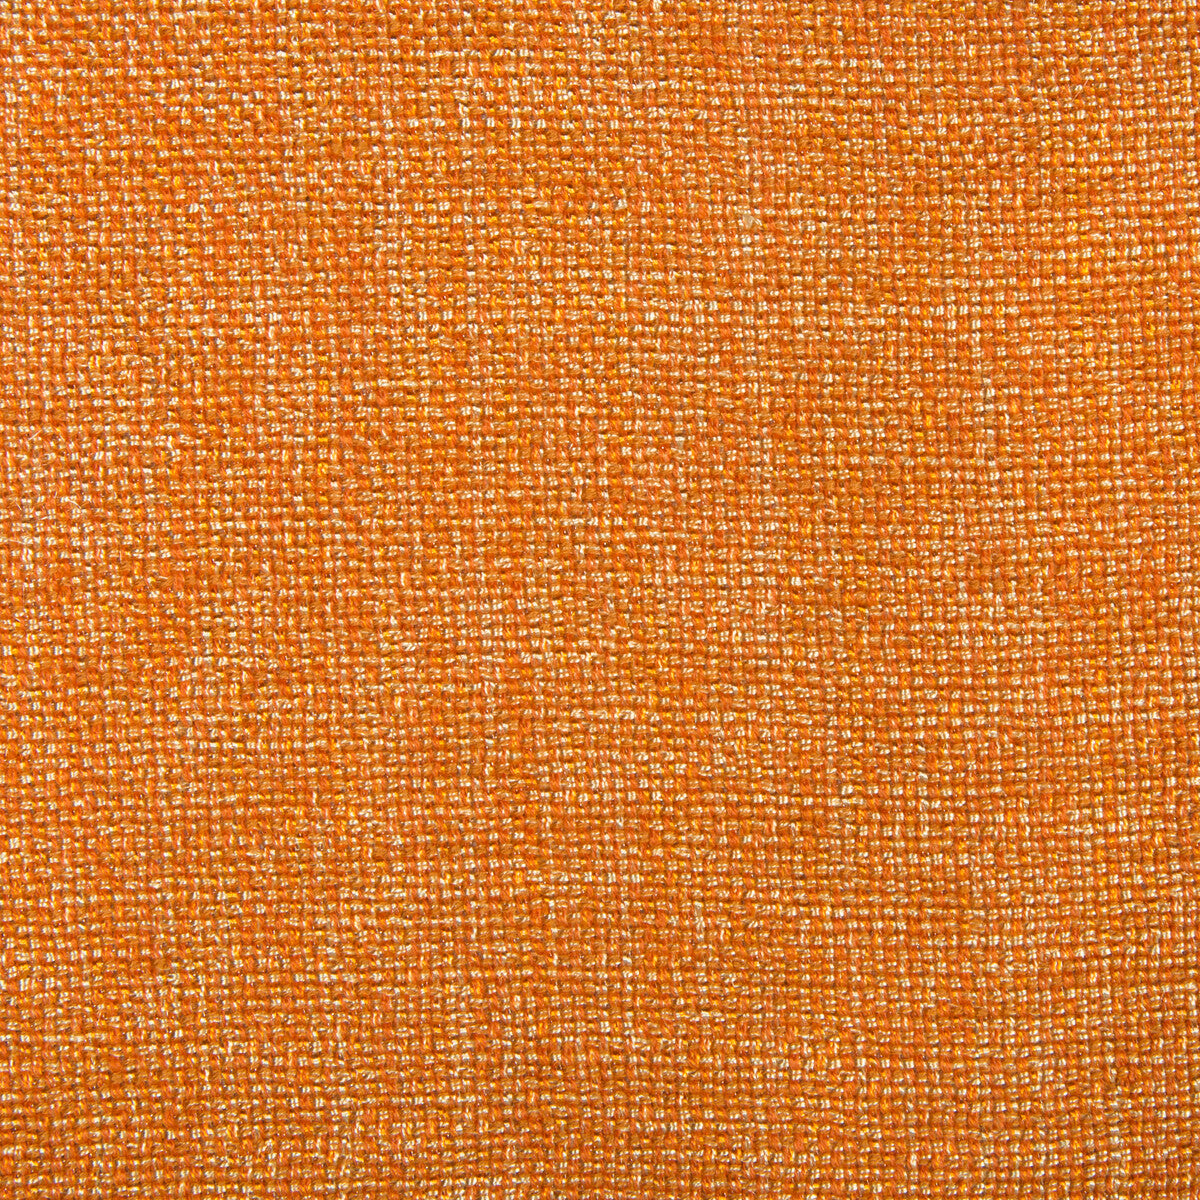 Kravet Contract fabric in 34926-112 color - pattern 34926.112.0 - by Kravet Contract